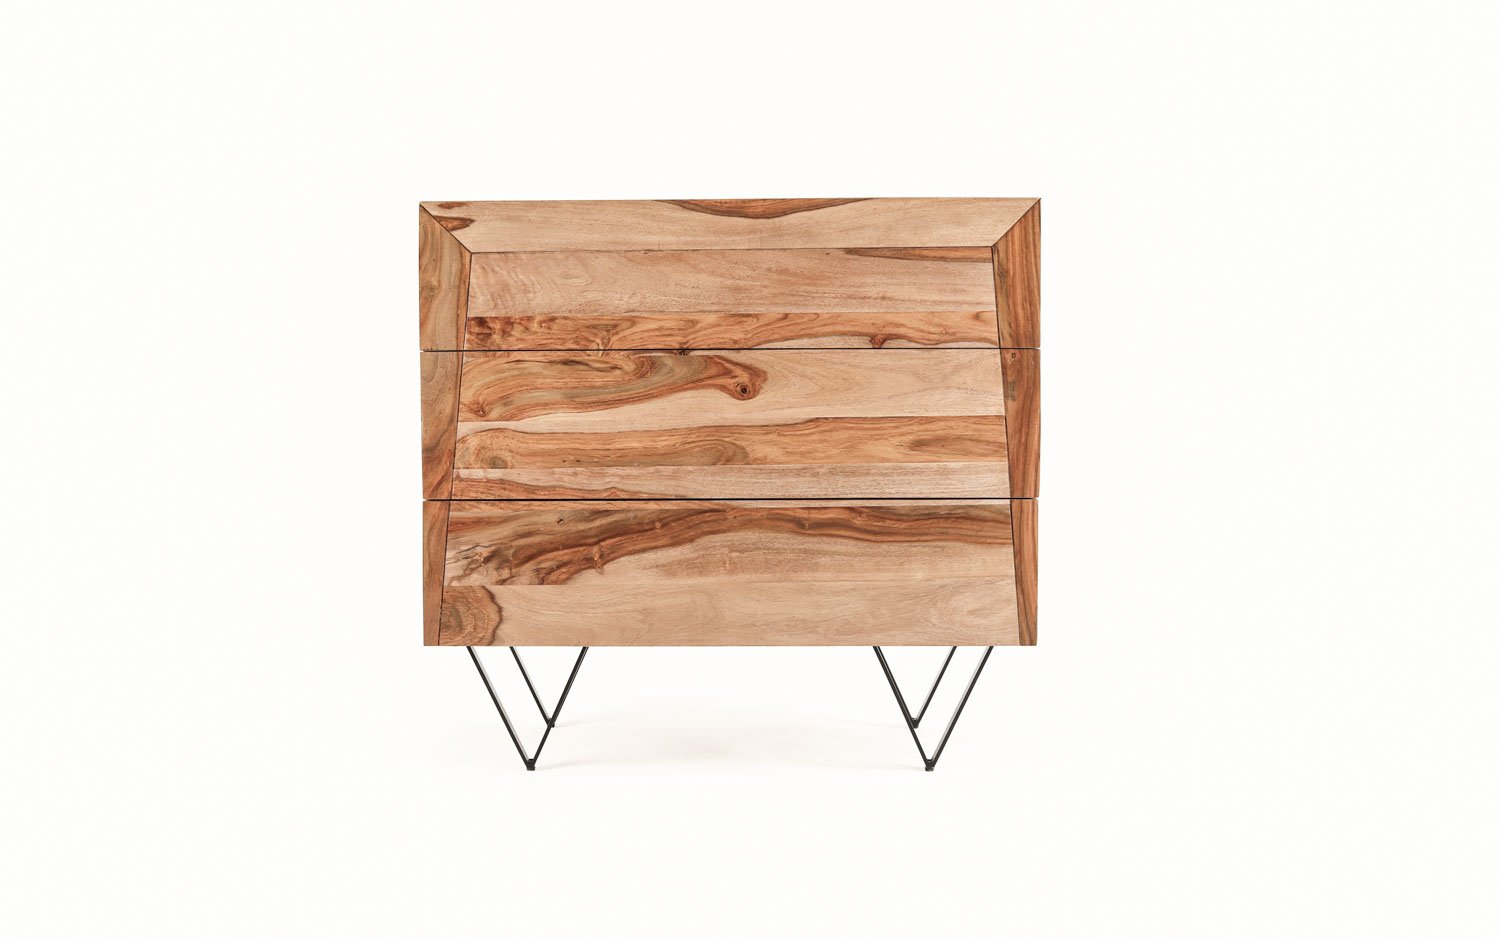 Metric Chest of Drawer made of wood with morden design